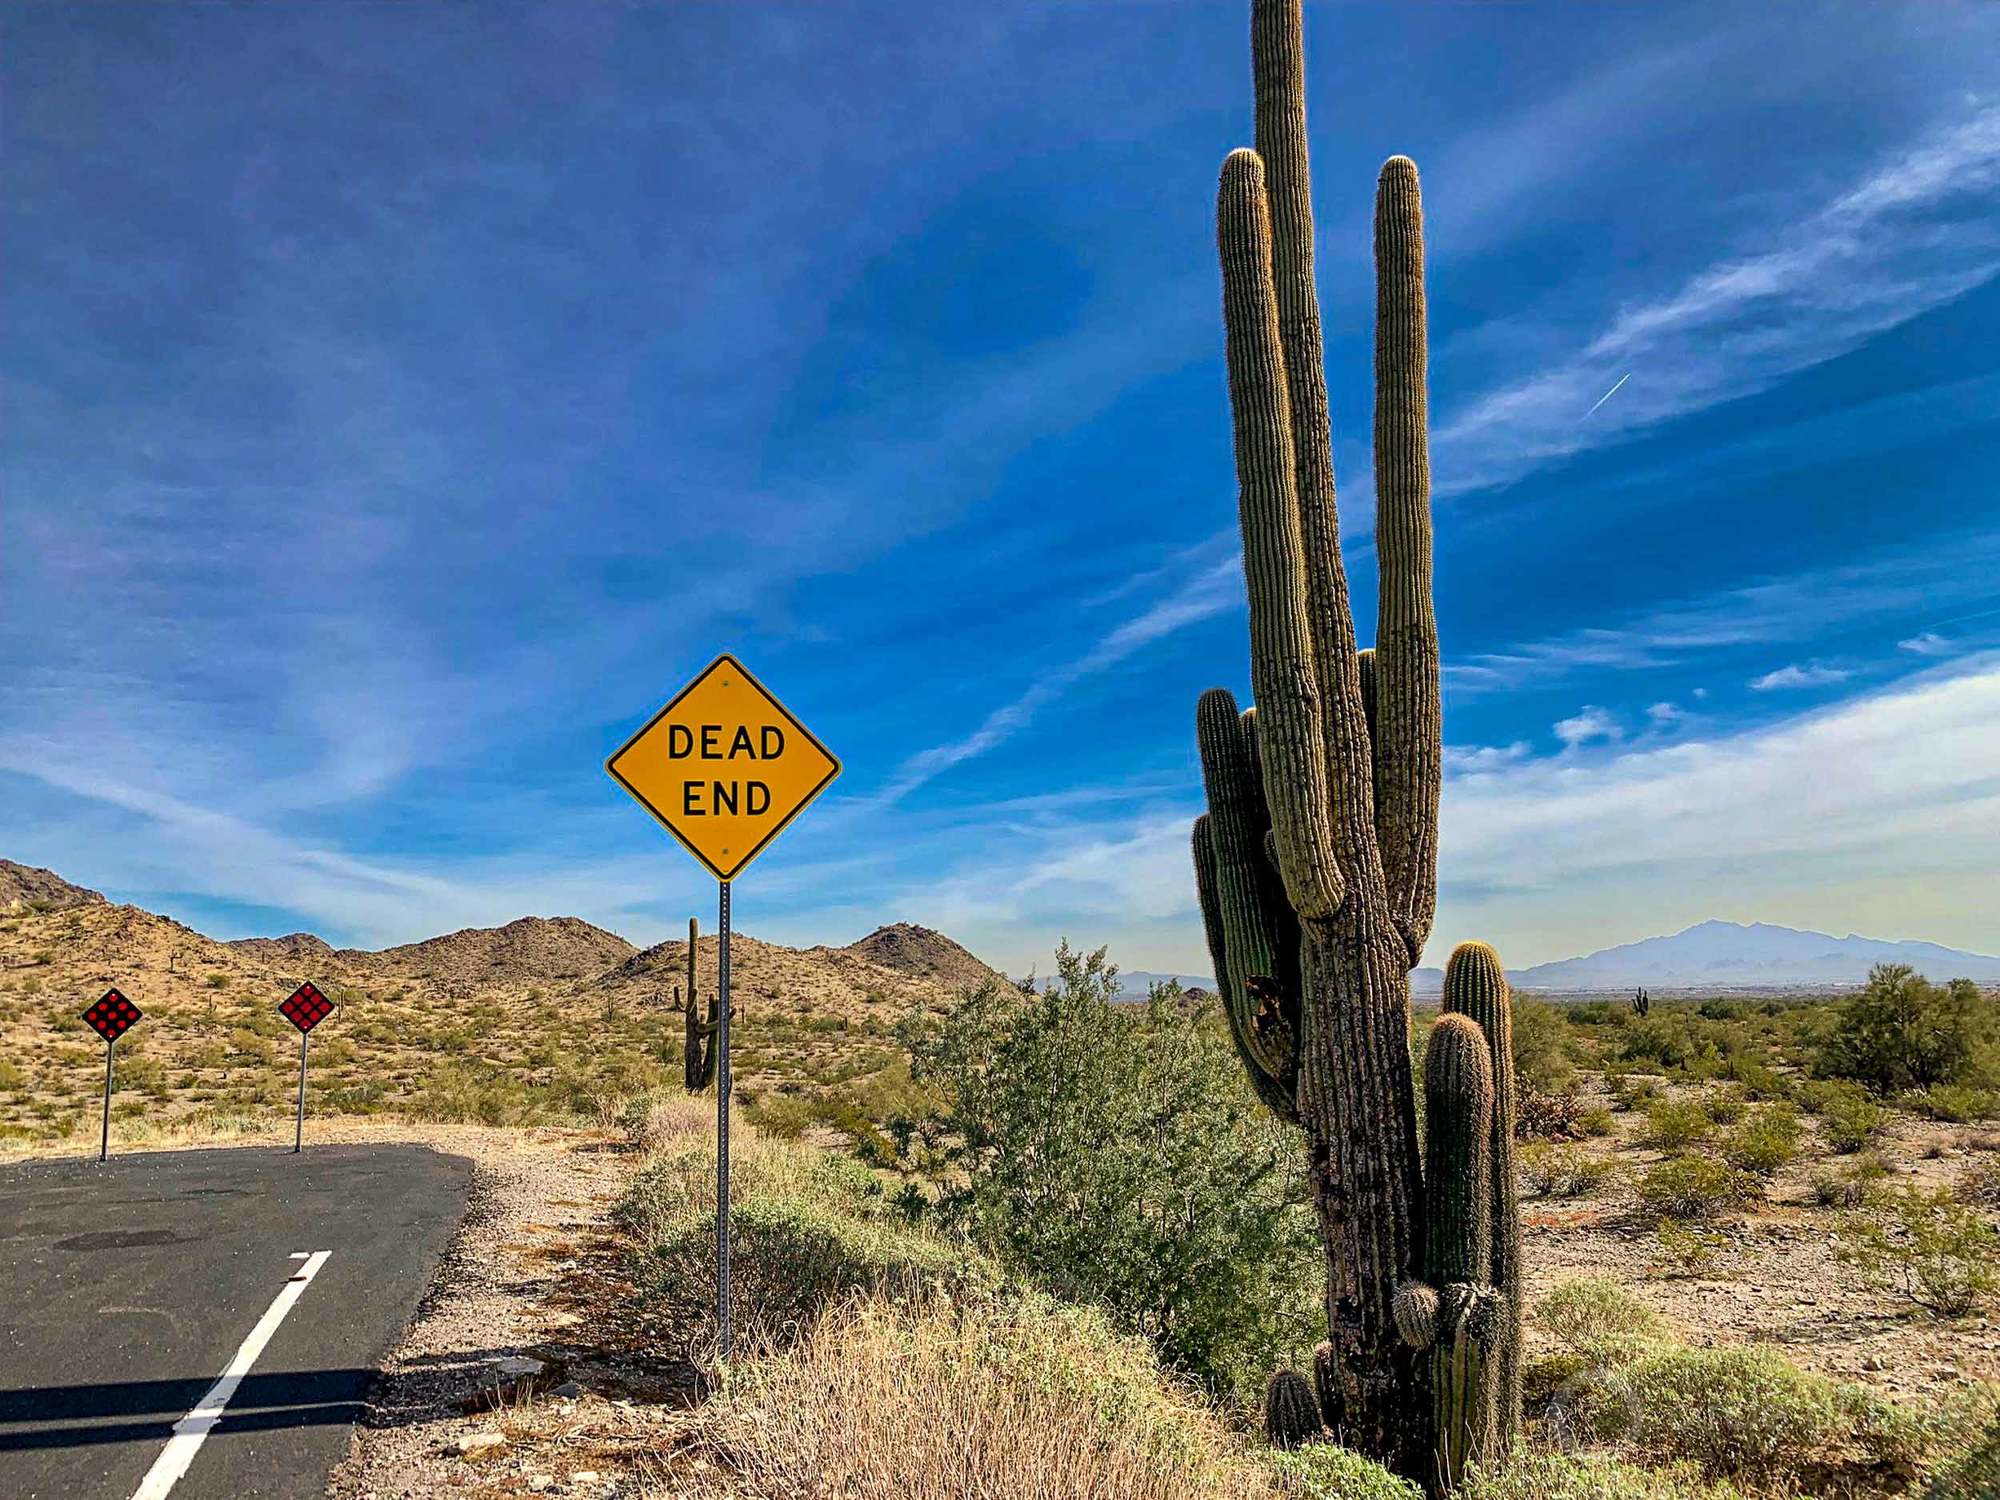 A cactus stands next to a yellow dead end sign on a sunny day April 2022.